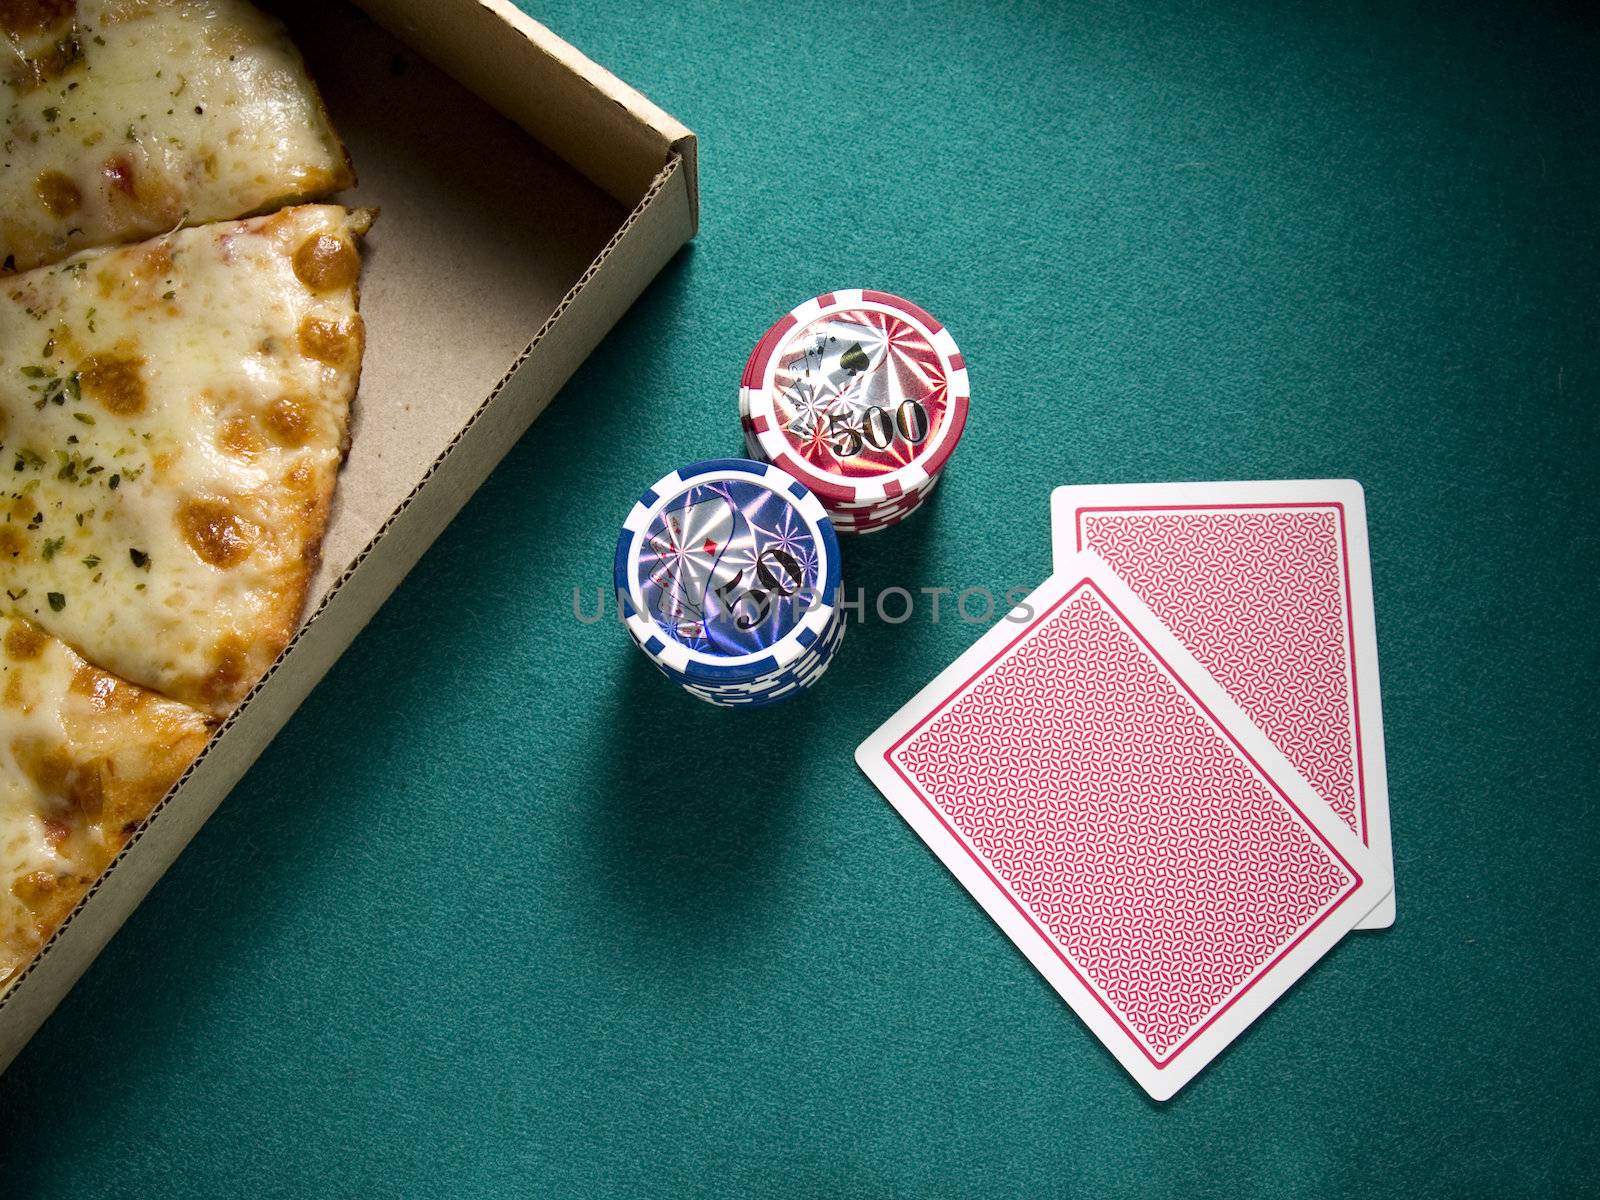 Two cards, two piles of chips and a box of pizza over a green felt.